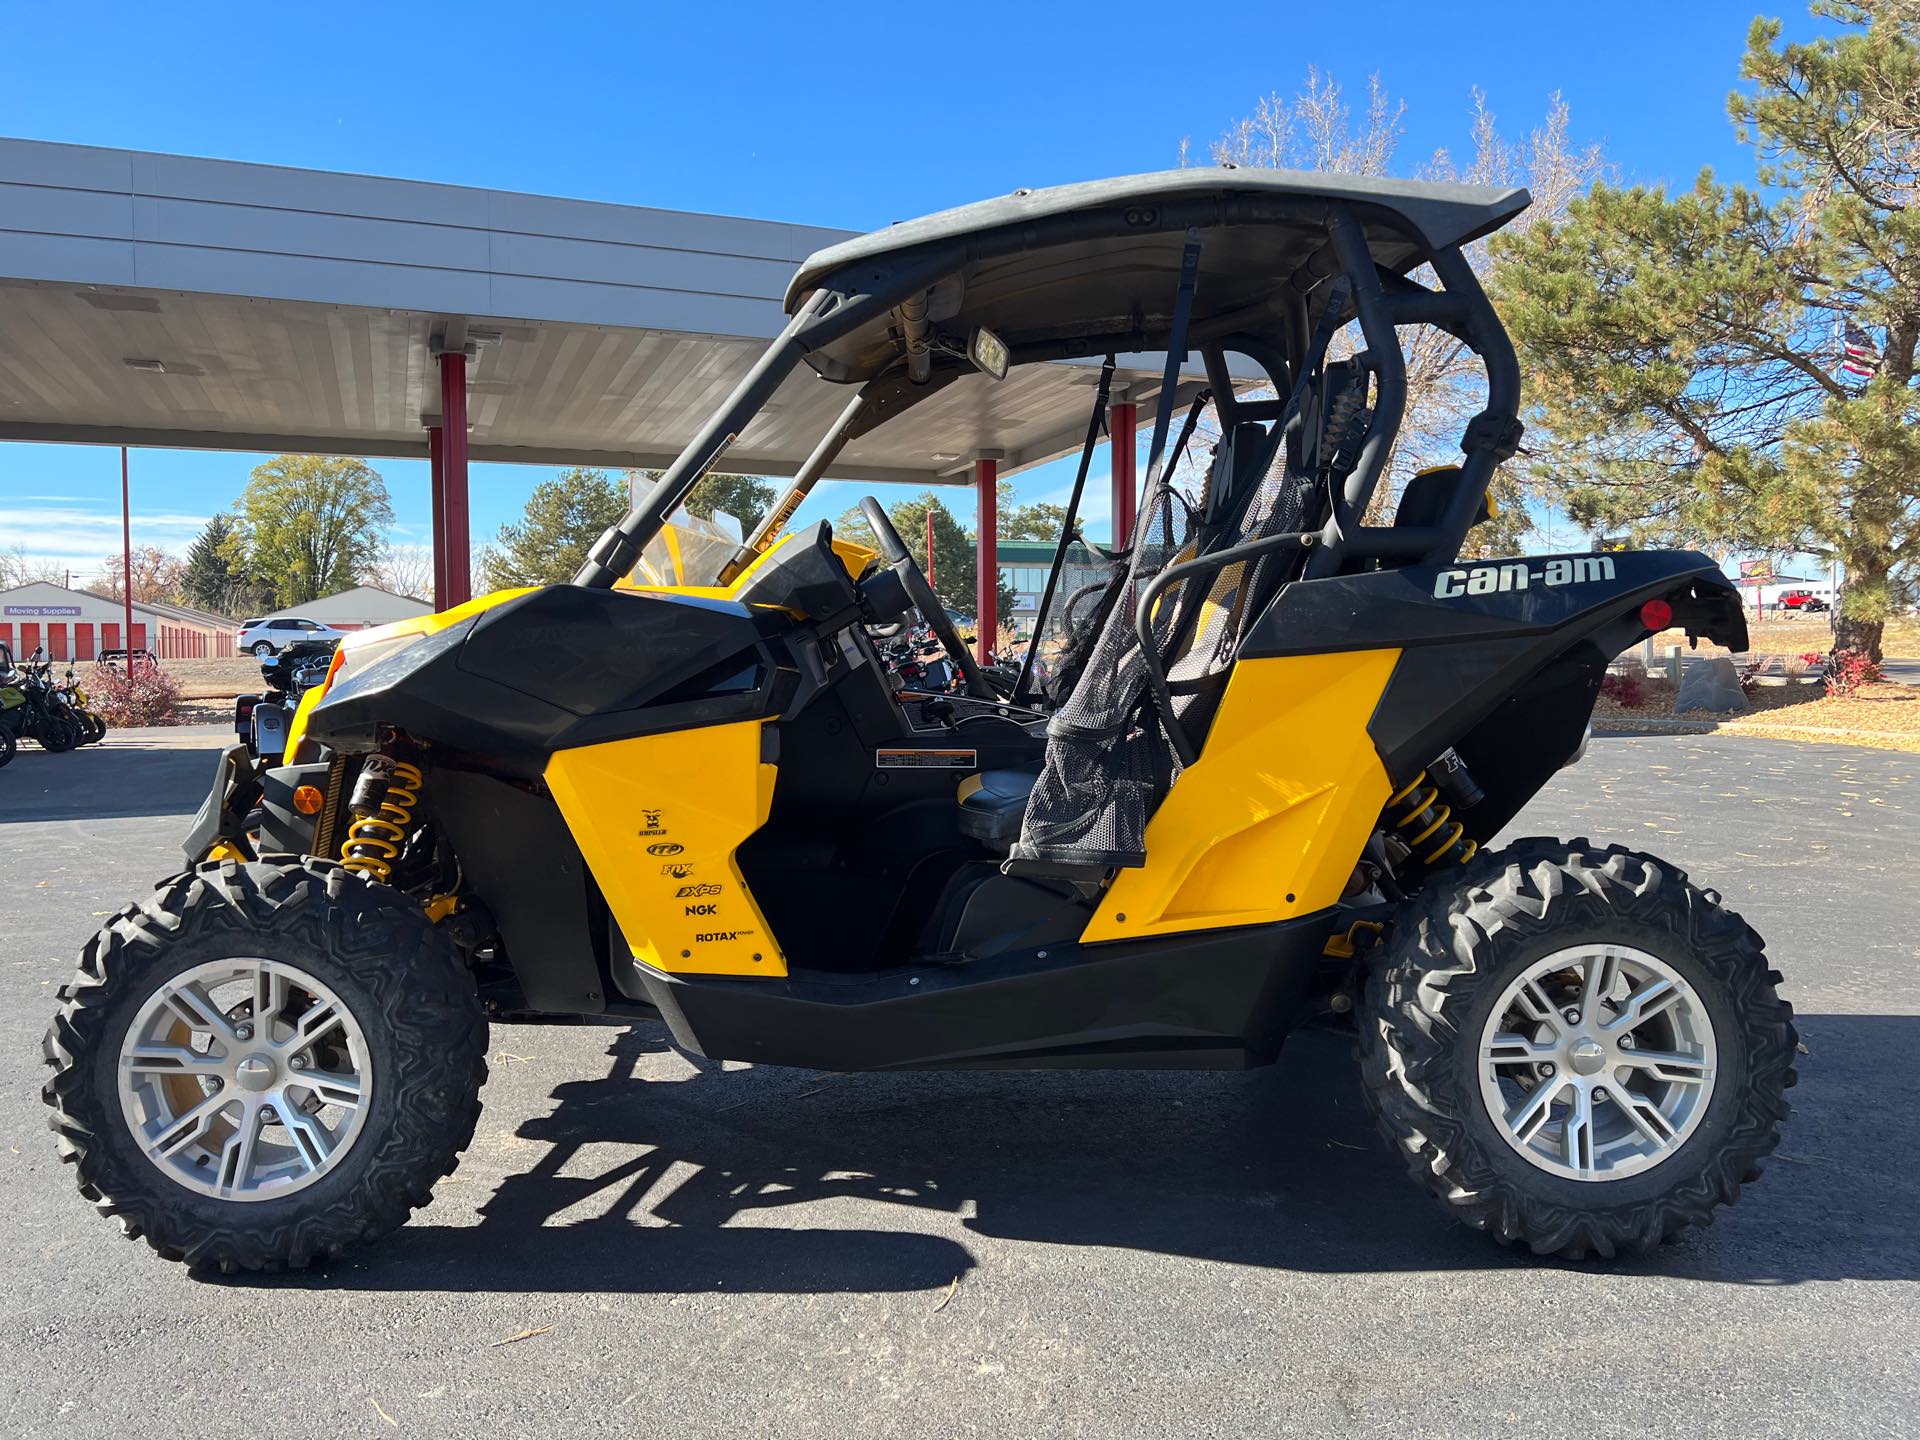 2013 Can-Am Maverick 1000 X rs at Aces Motorcycles - Fort Collins